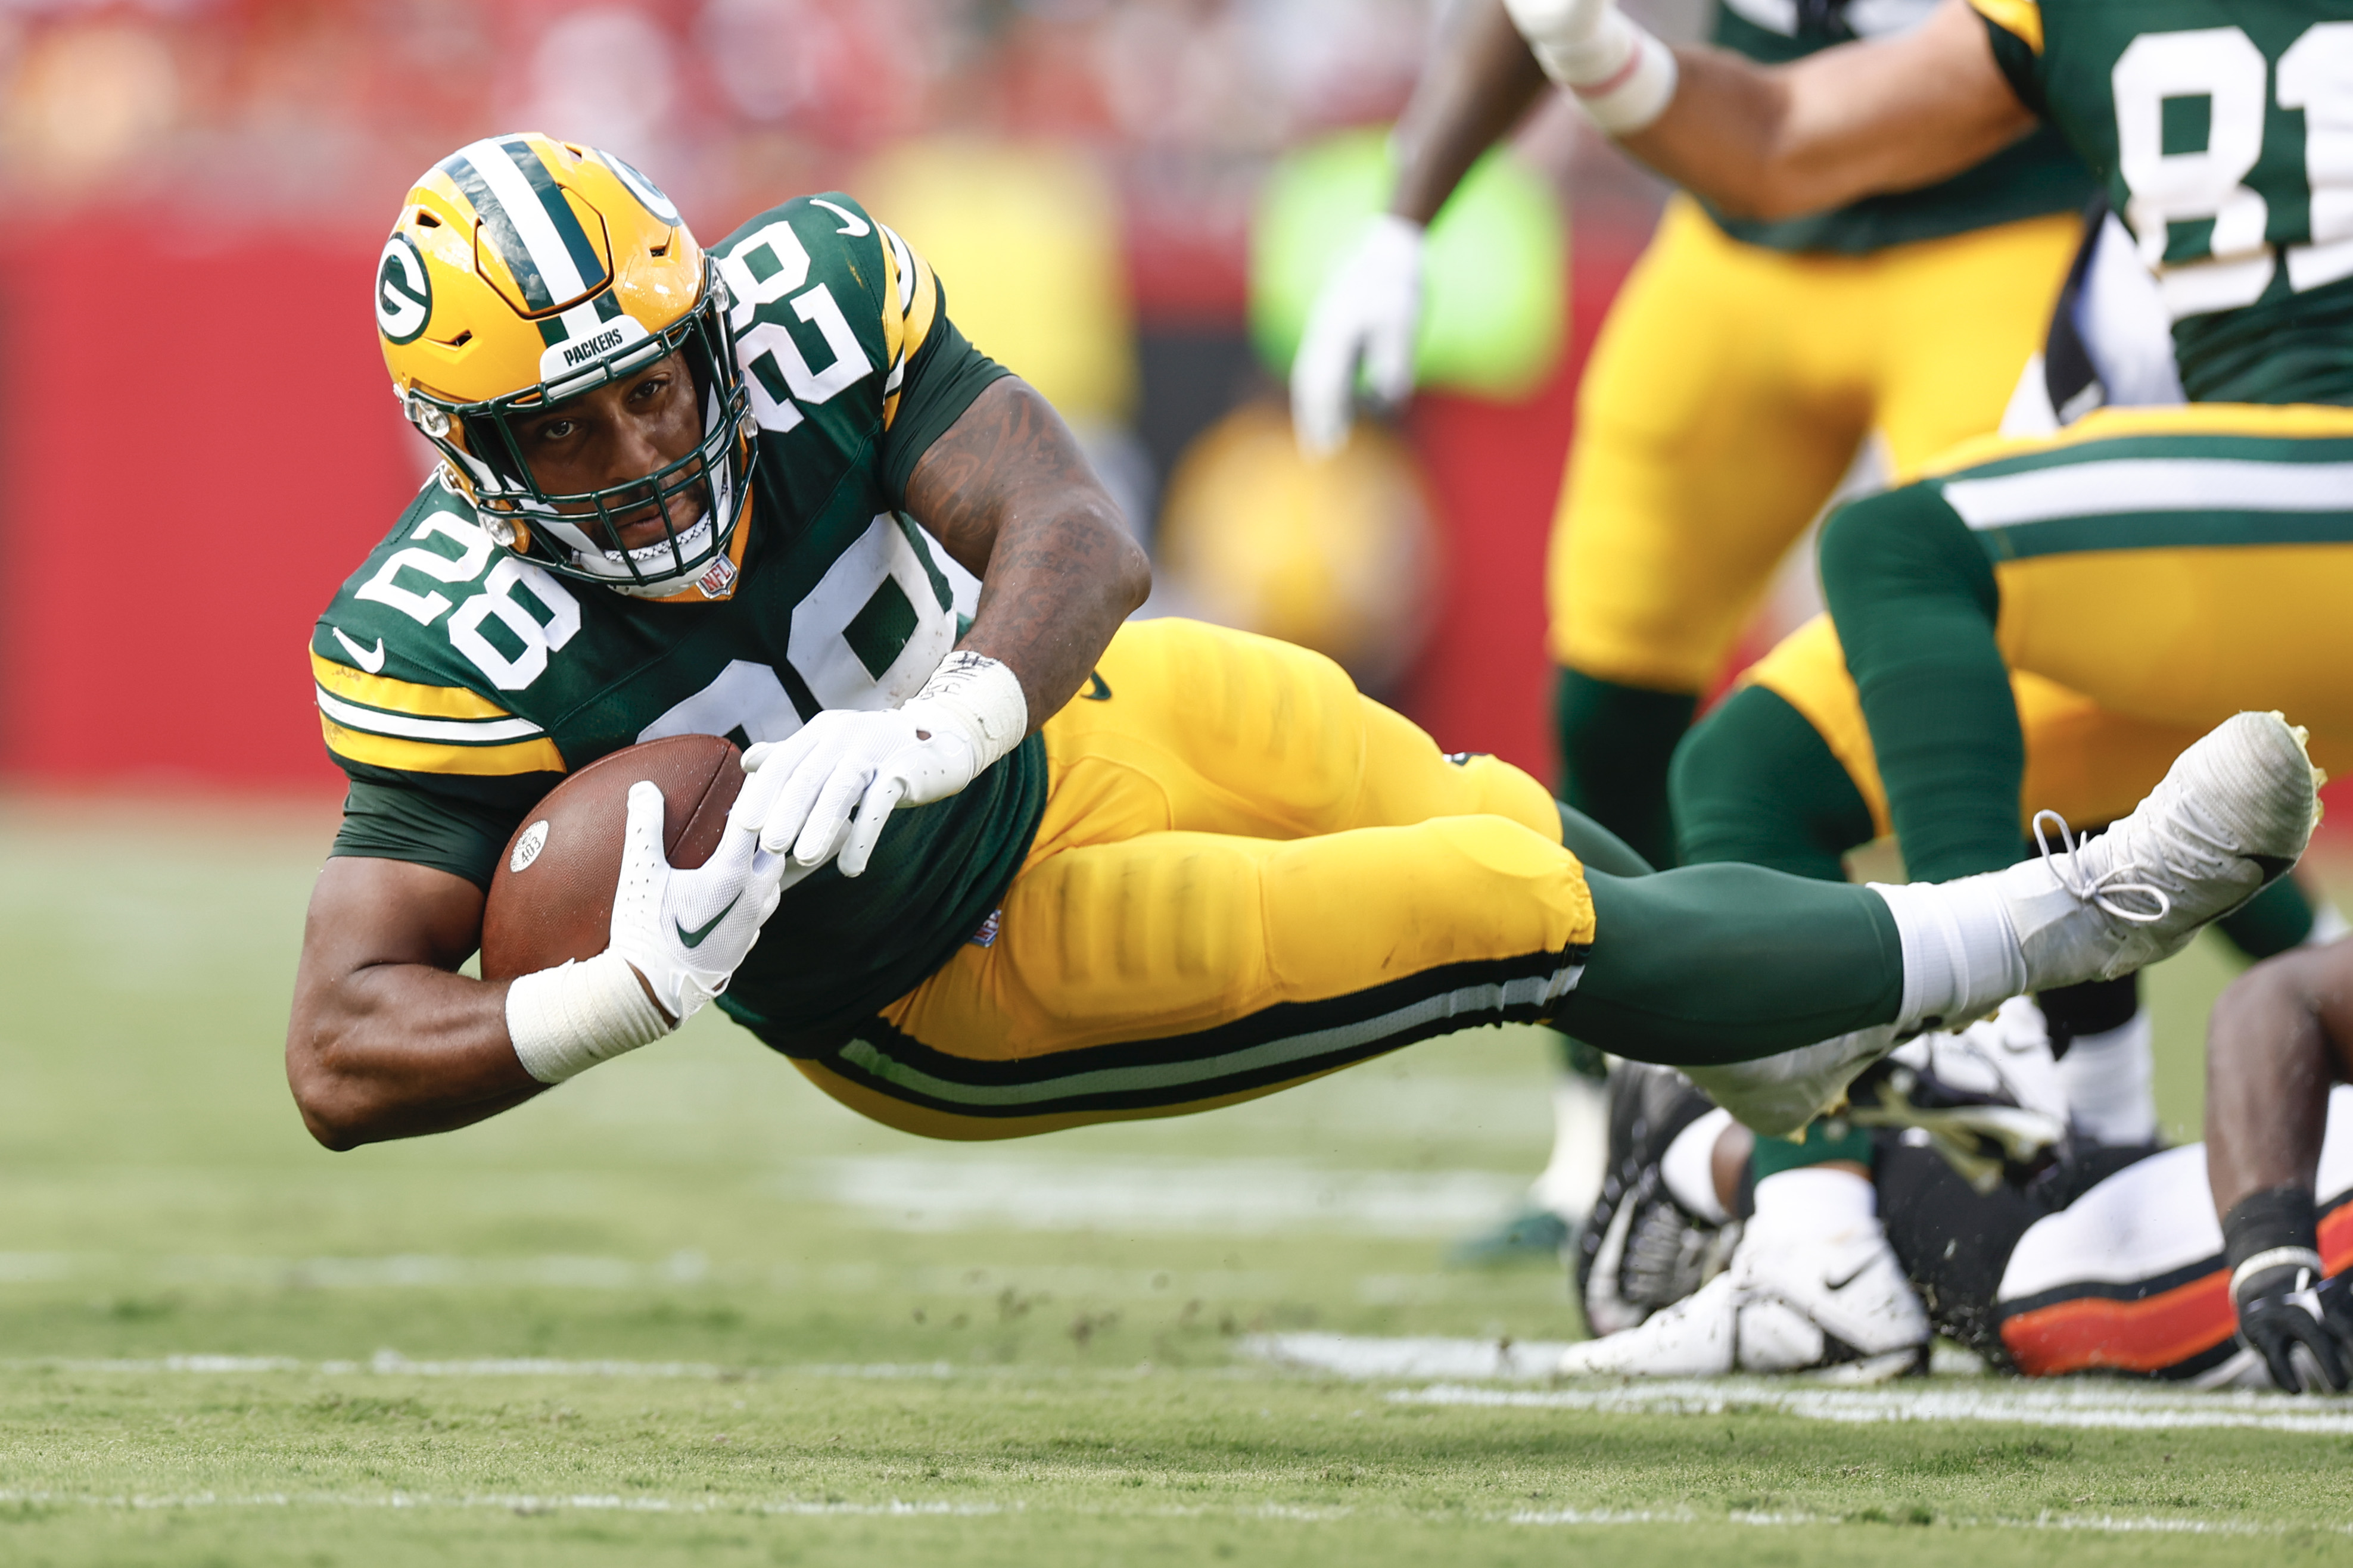 AJ Dillon #28 of the Green Bay Packers runs with the ball against the Tampa Bay Buccaneers during the second quarter at Raymond James Stadium on September 25, 2022 in Tampa, Florida.